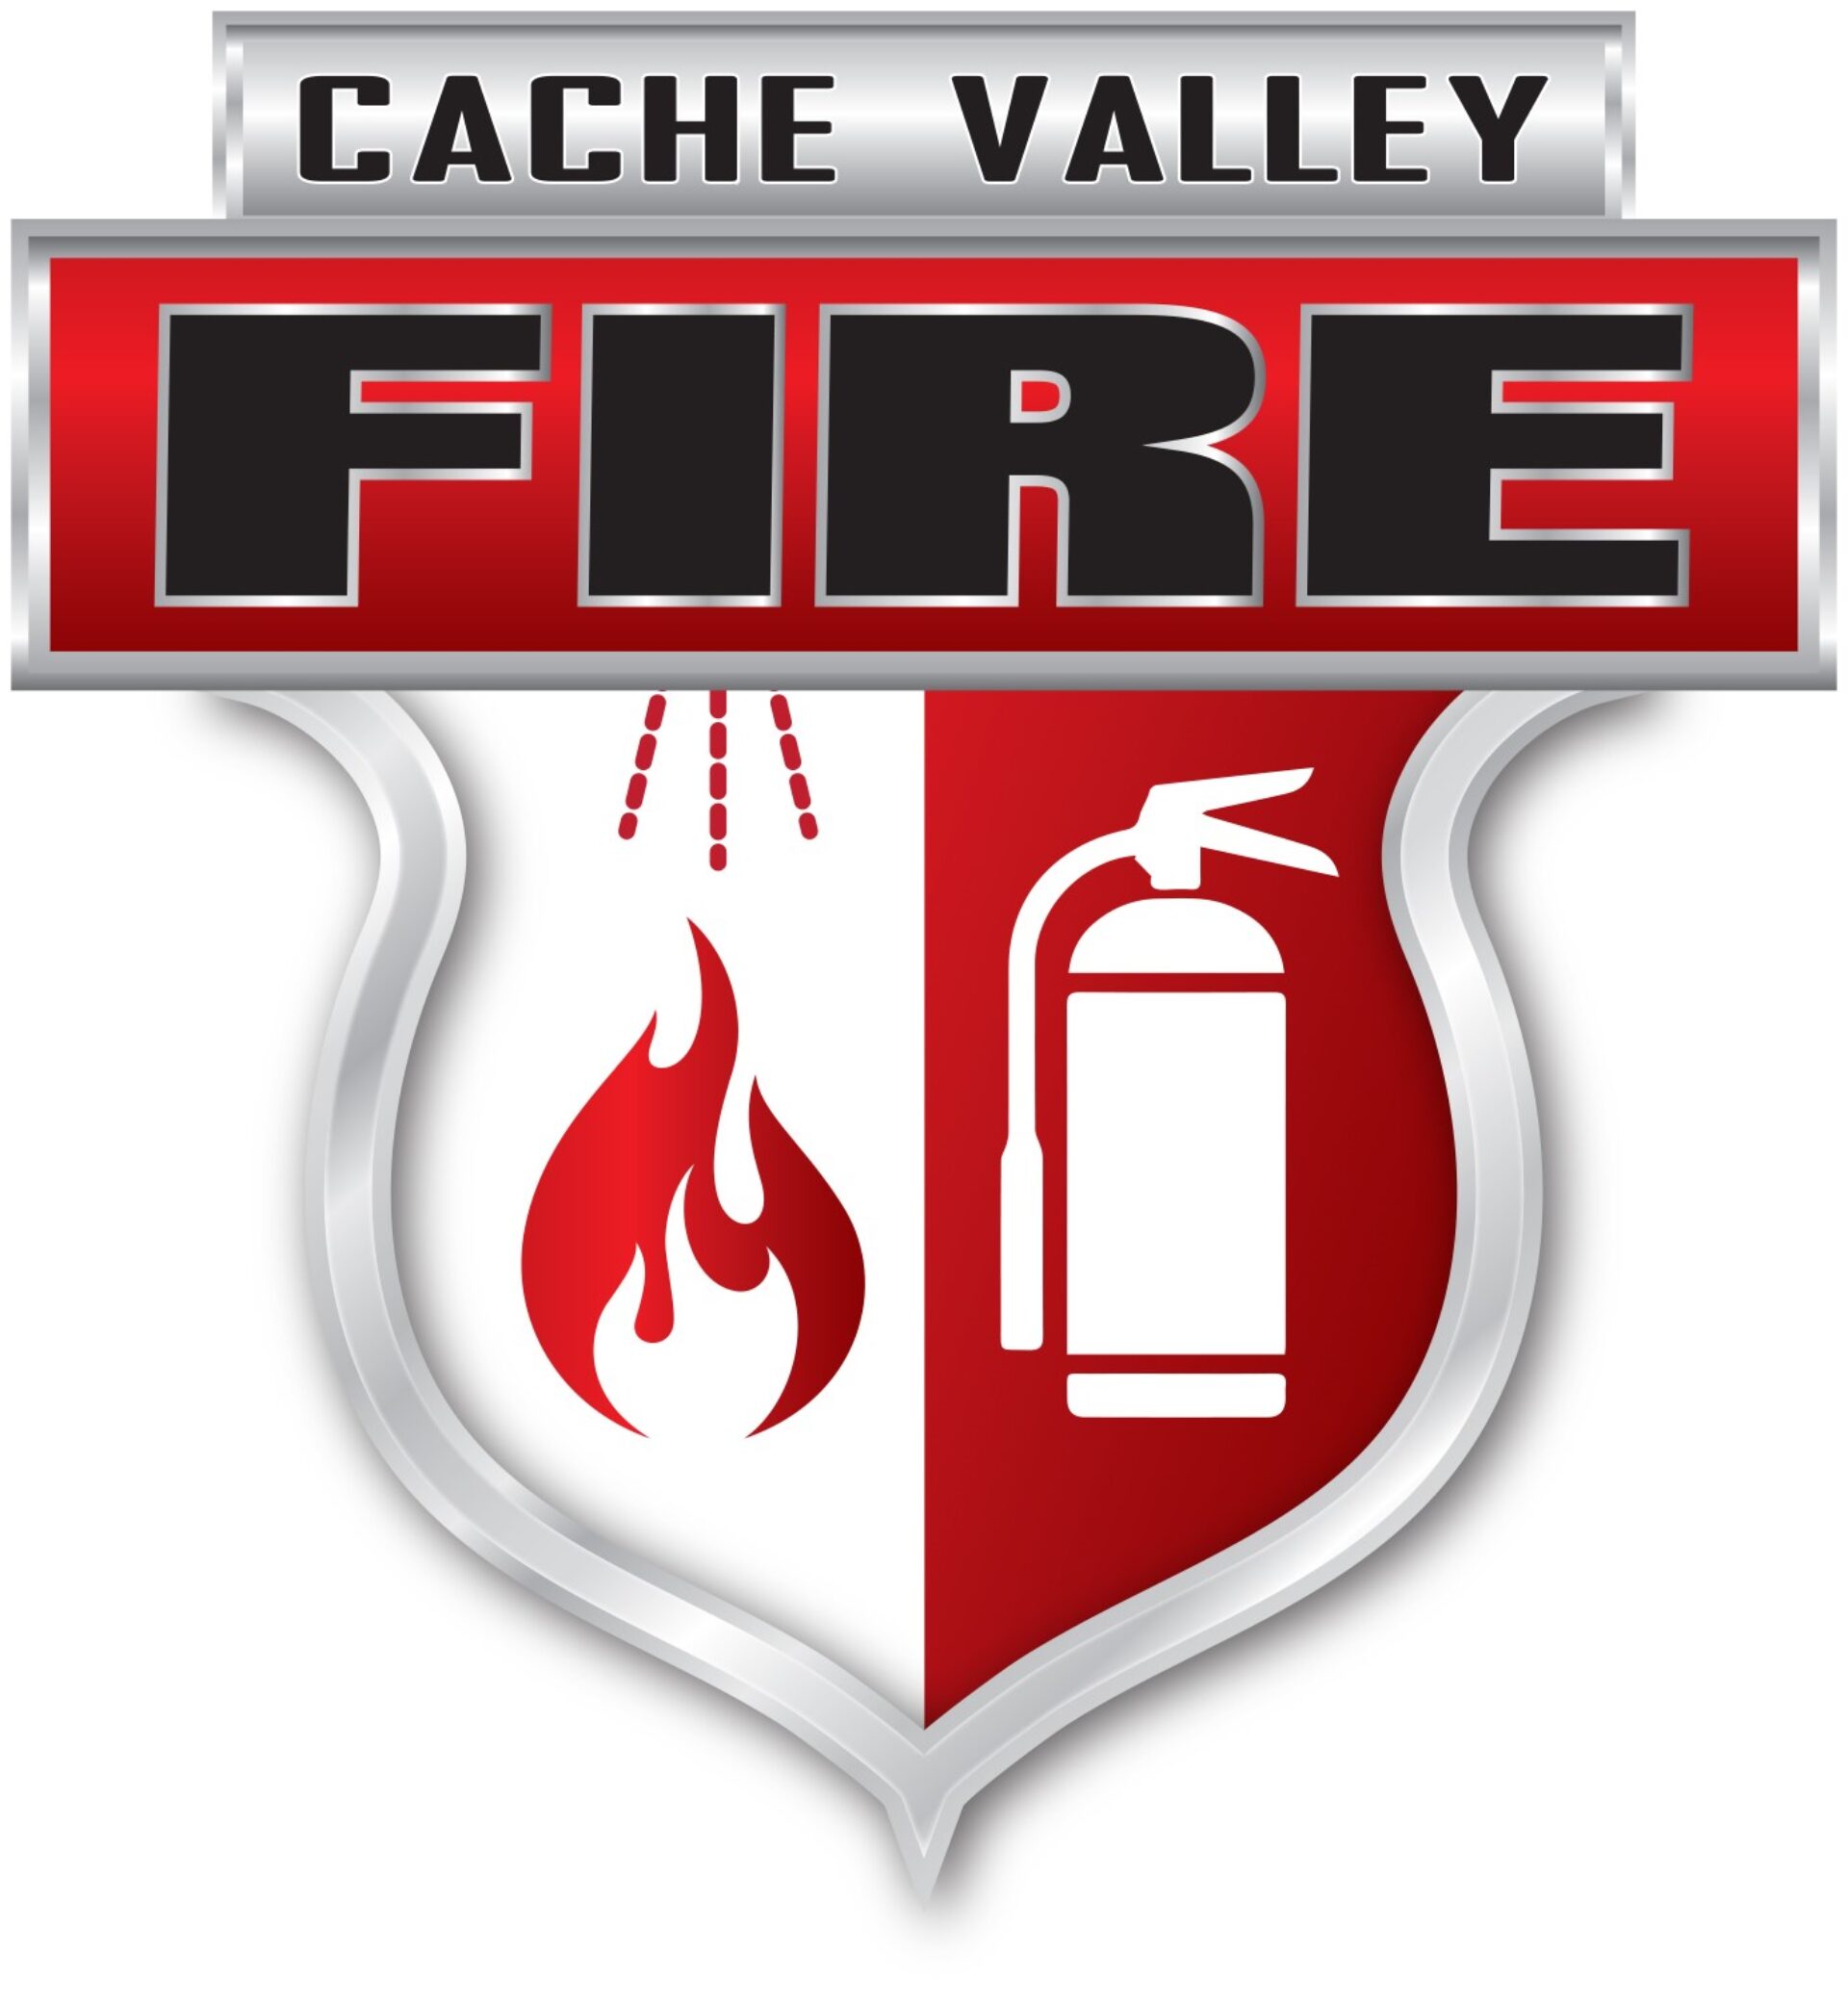 Cache Valley Fire Protection